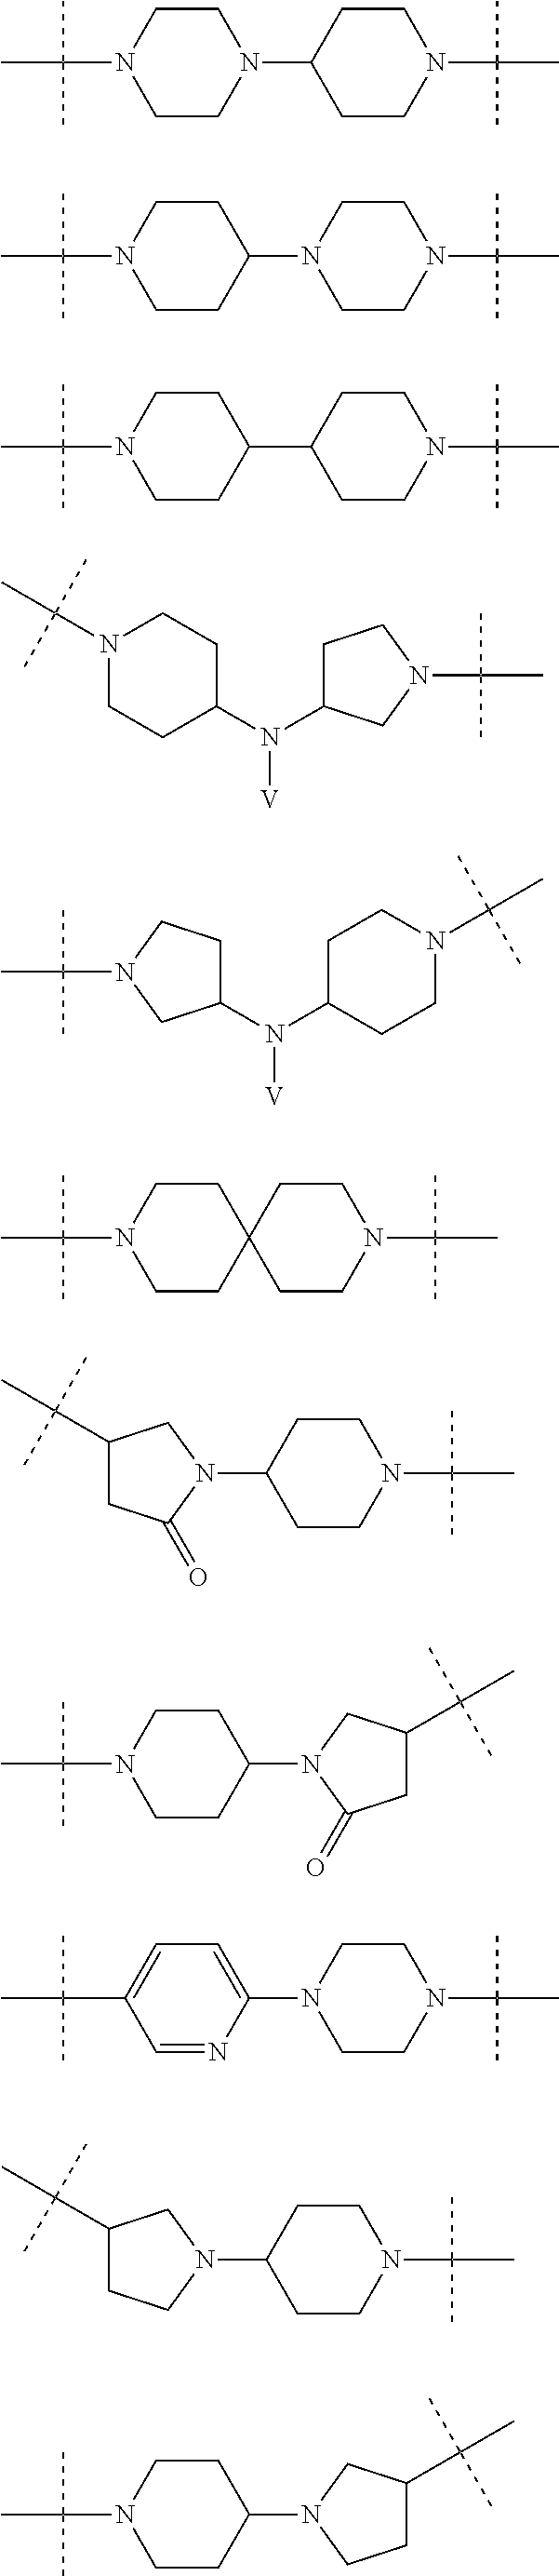 Piperidine and piperazine derivatives as autotaxin inhibitors